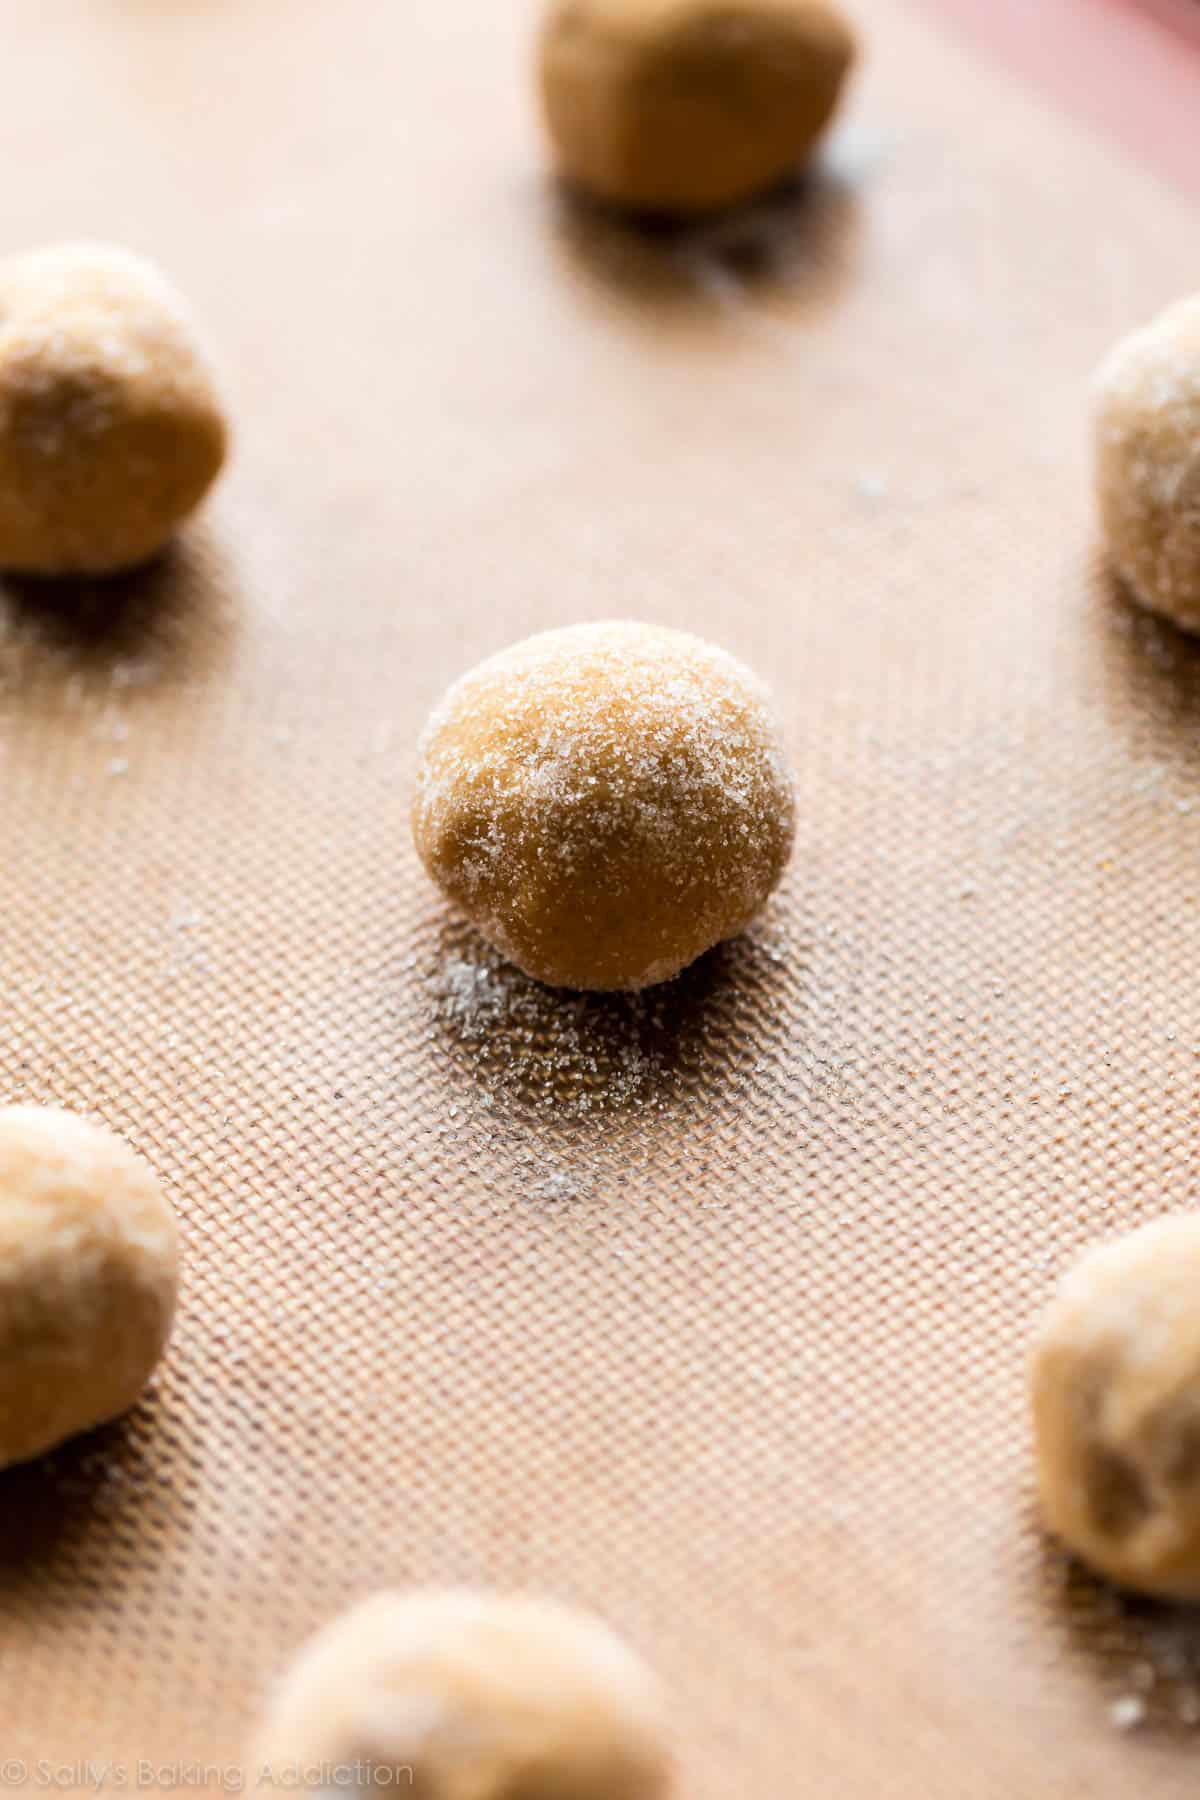 Peanut butter cookie dough rolled into balls on a silpat